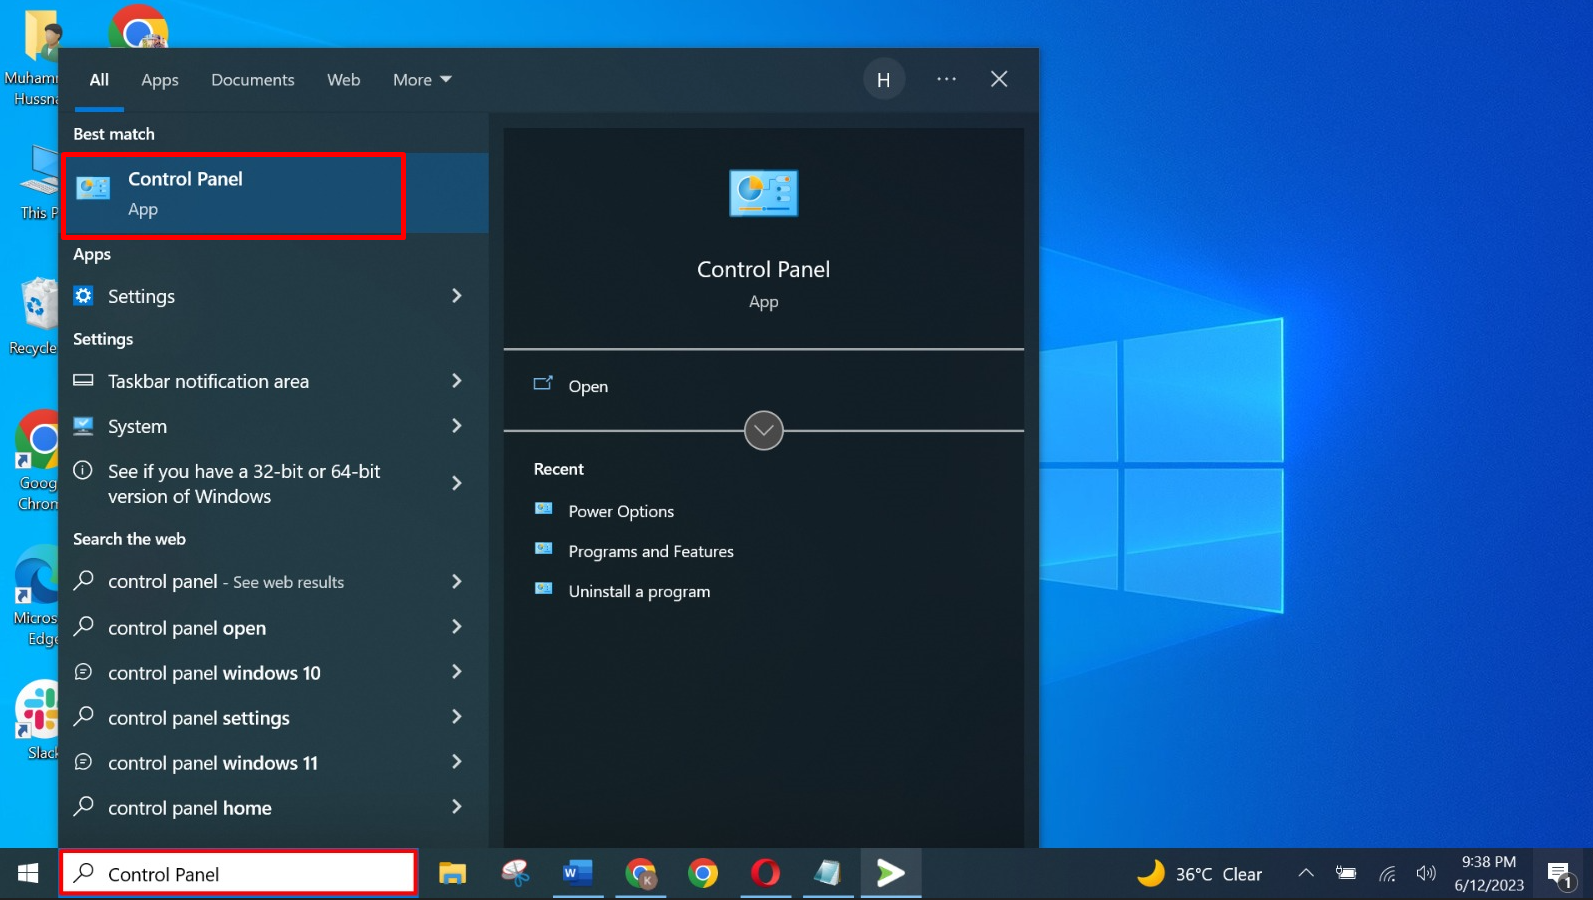 Search Control penal from Start menu